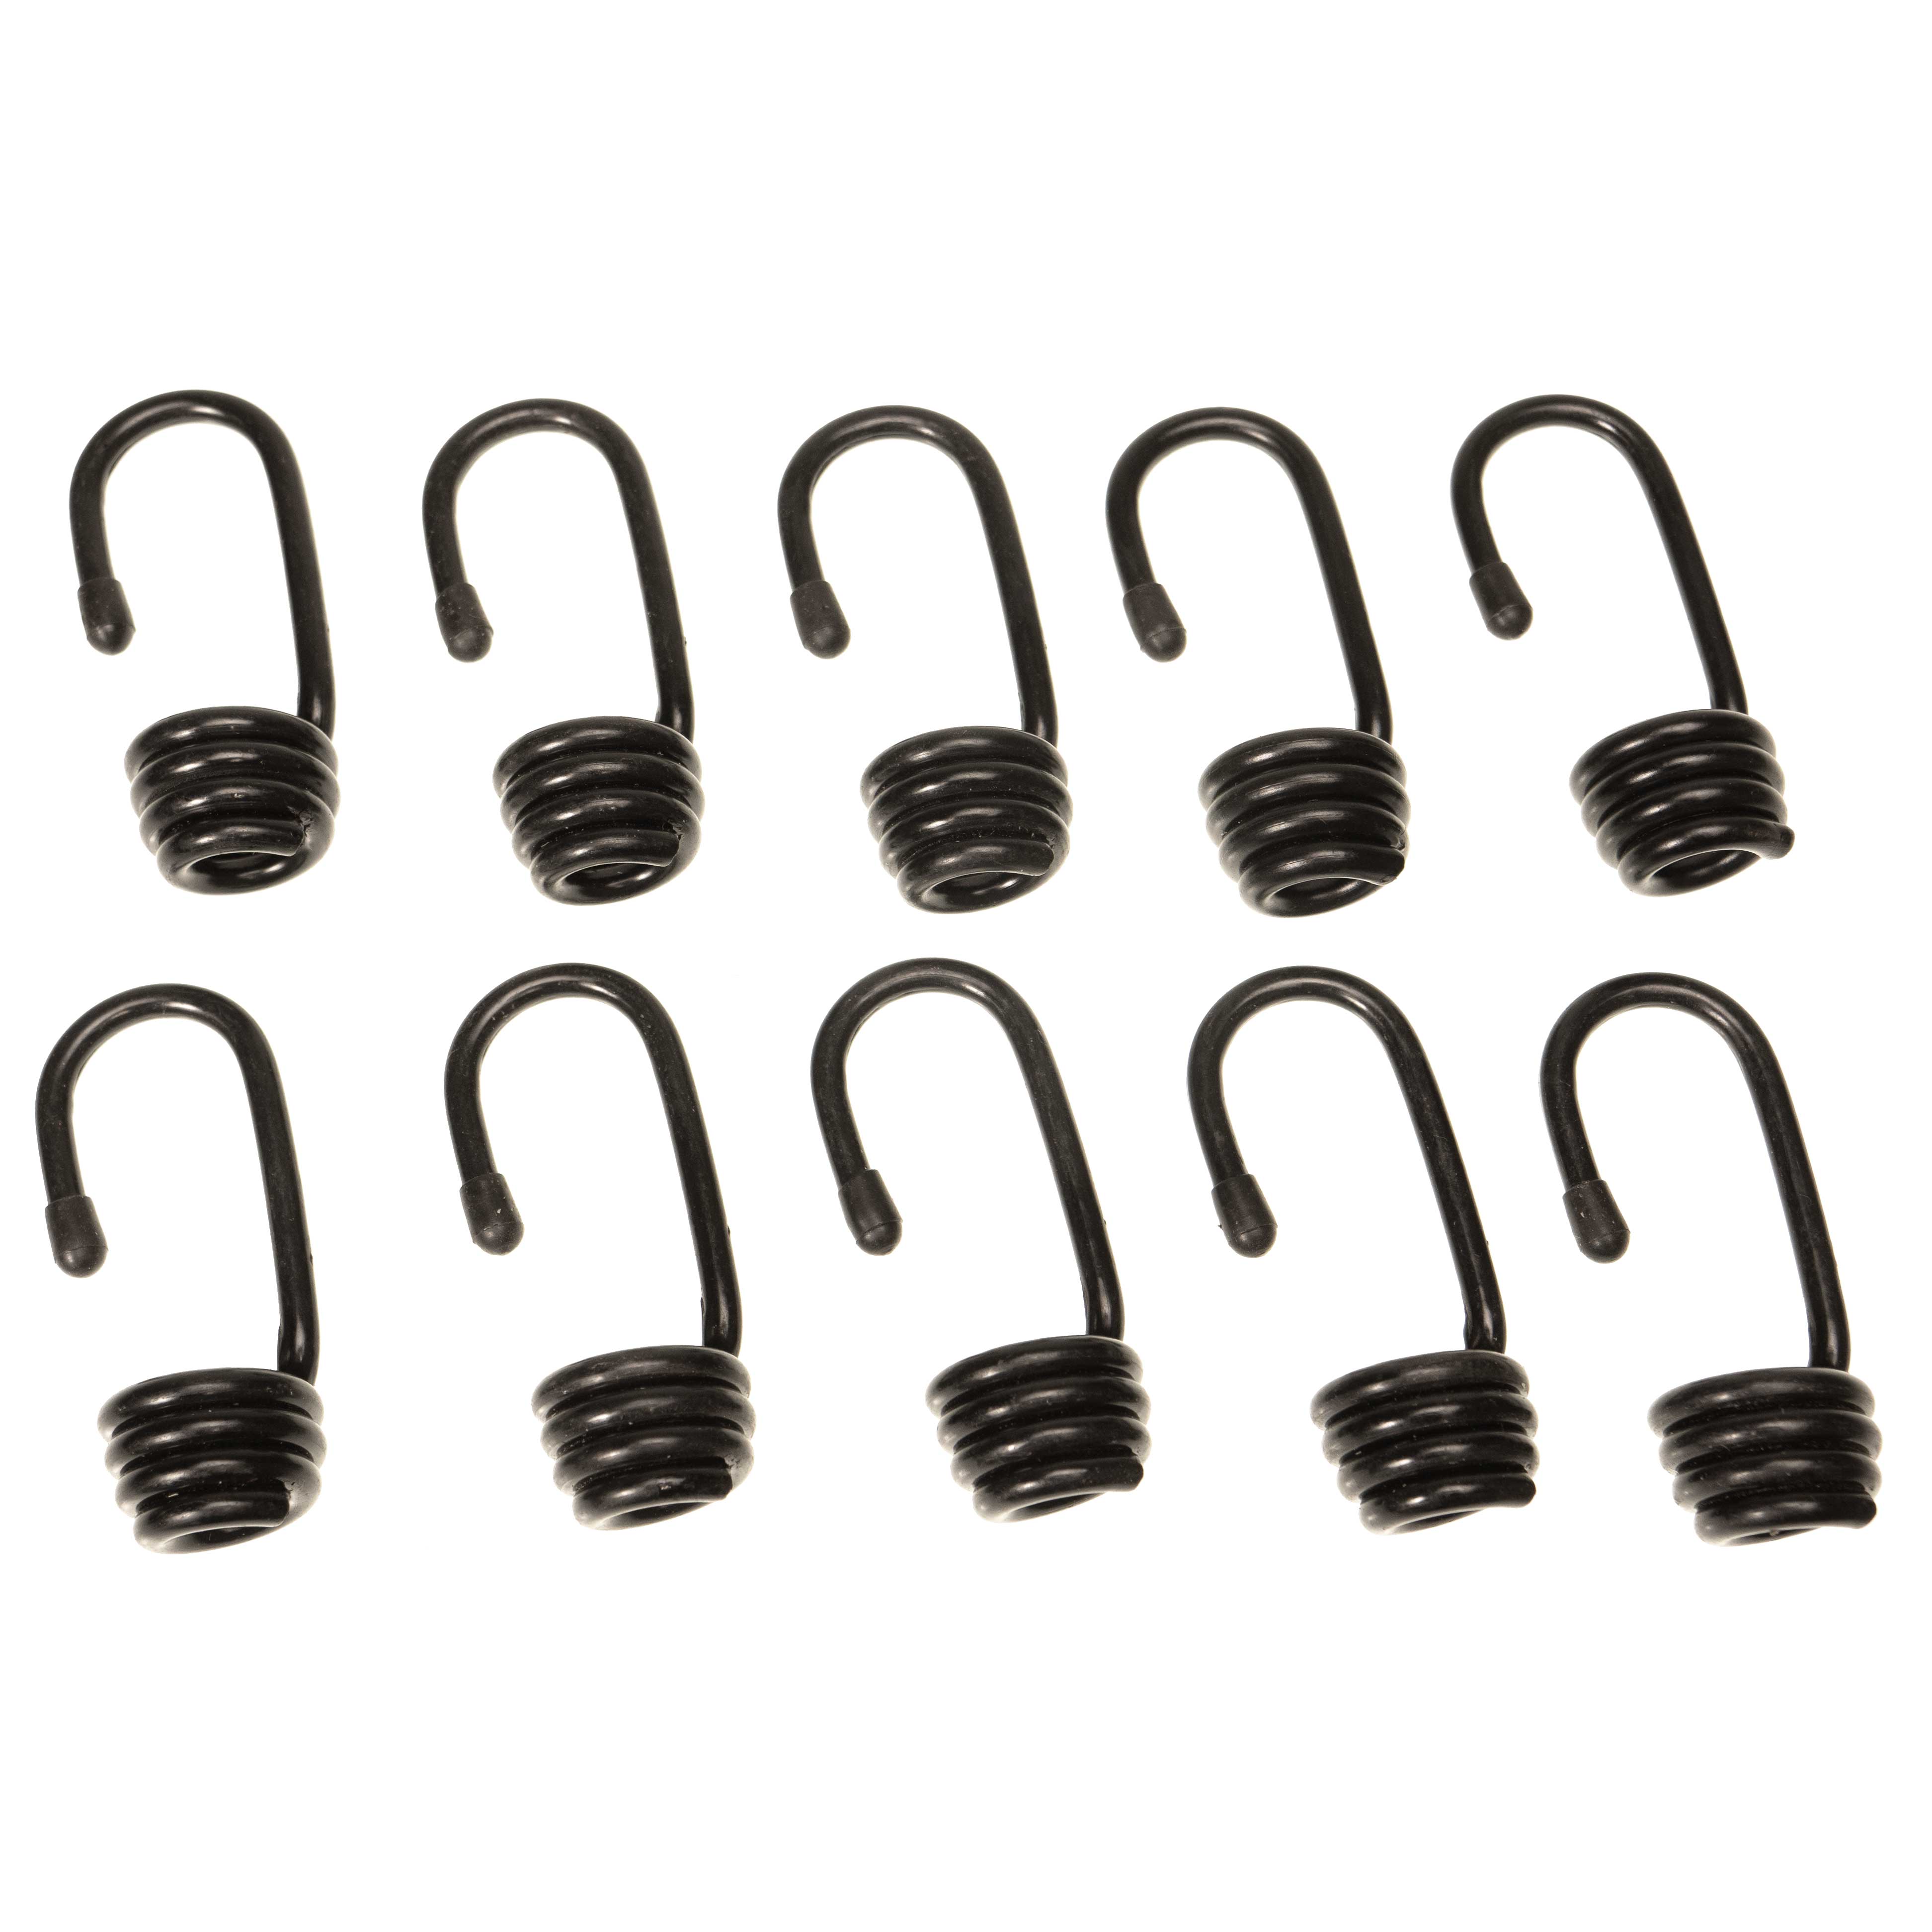 US Cargo Control SHCH12-10PK 1/2'' PVC Coated Bungee Hook (12 mm) - 10